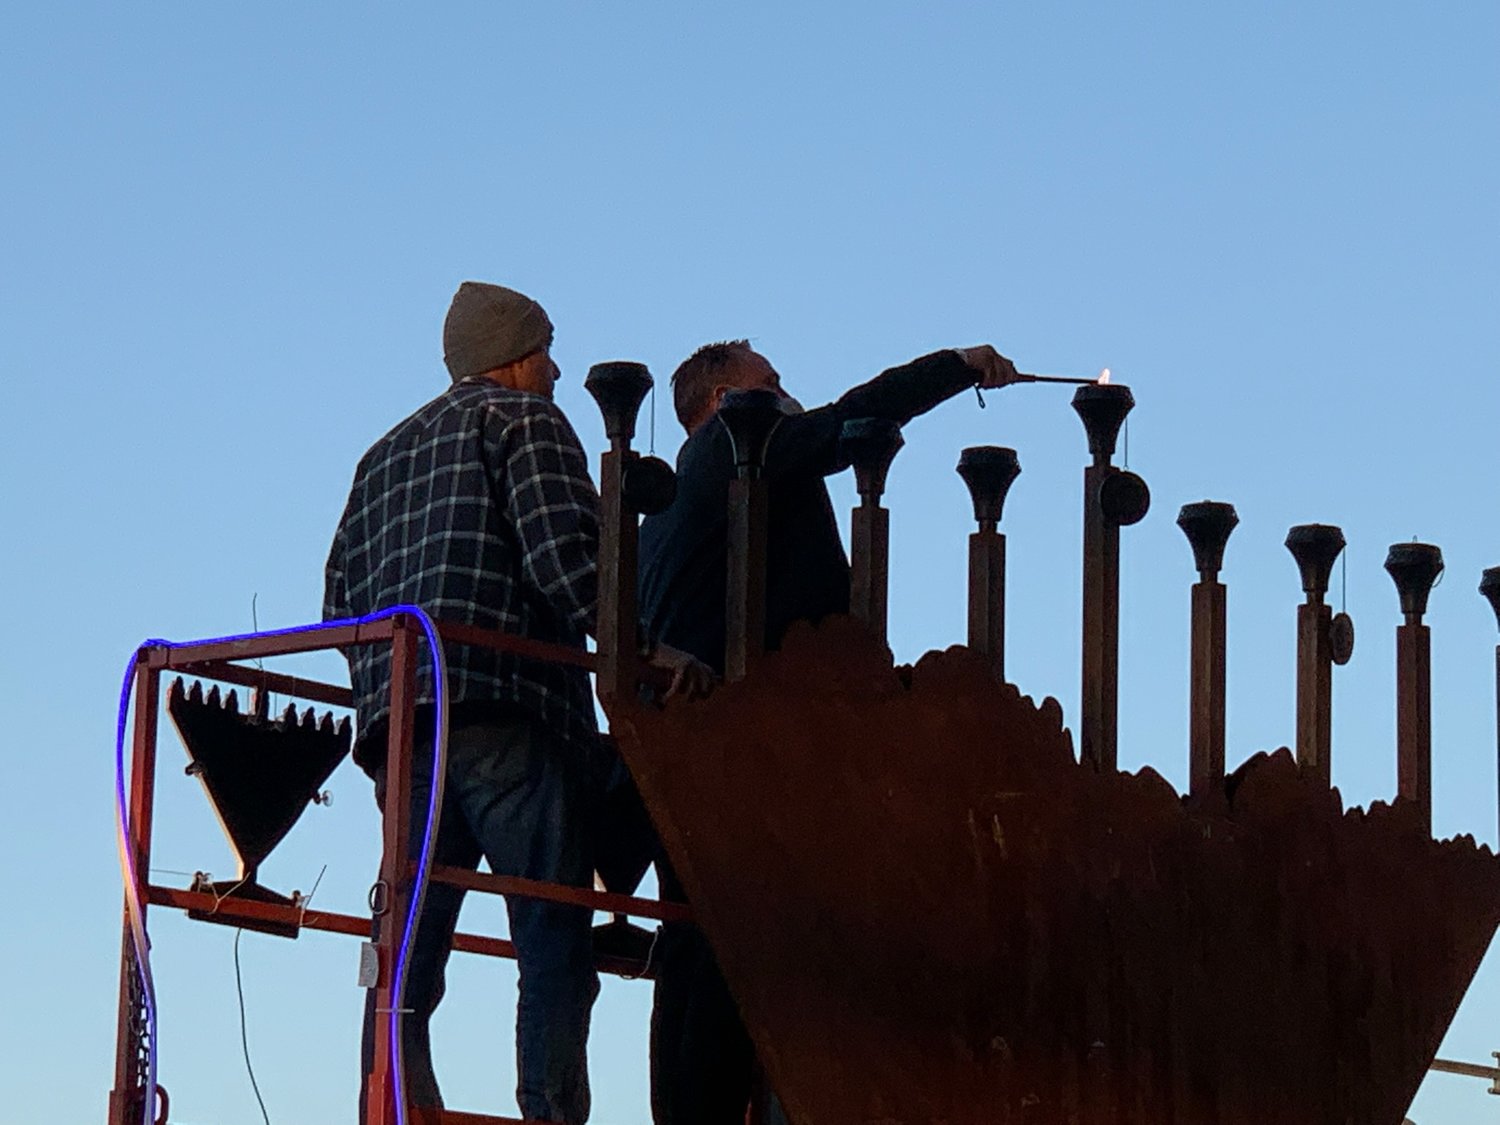 New Mexico Lt. Gov. Howie Morales, right, lights the shammash (helper flame) on the giant menorah at Plaza de Las Cruces as the sun sets Sunday, Nov. 28. Ross Marks is on the left and will light the first flame of the season. Chanukah begins at sunset and continues for eight days. This year’s celebration on the plaza welcomed and fed close to 1,000 people.